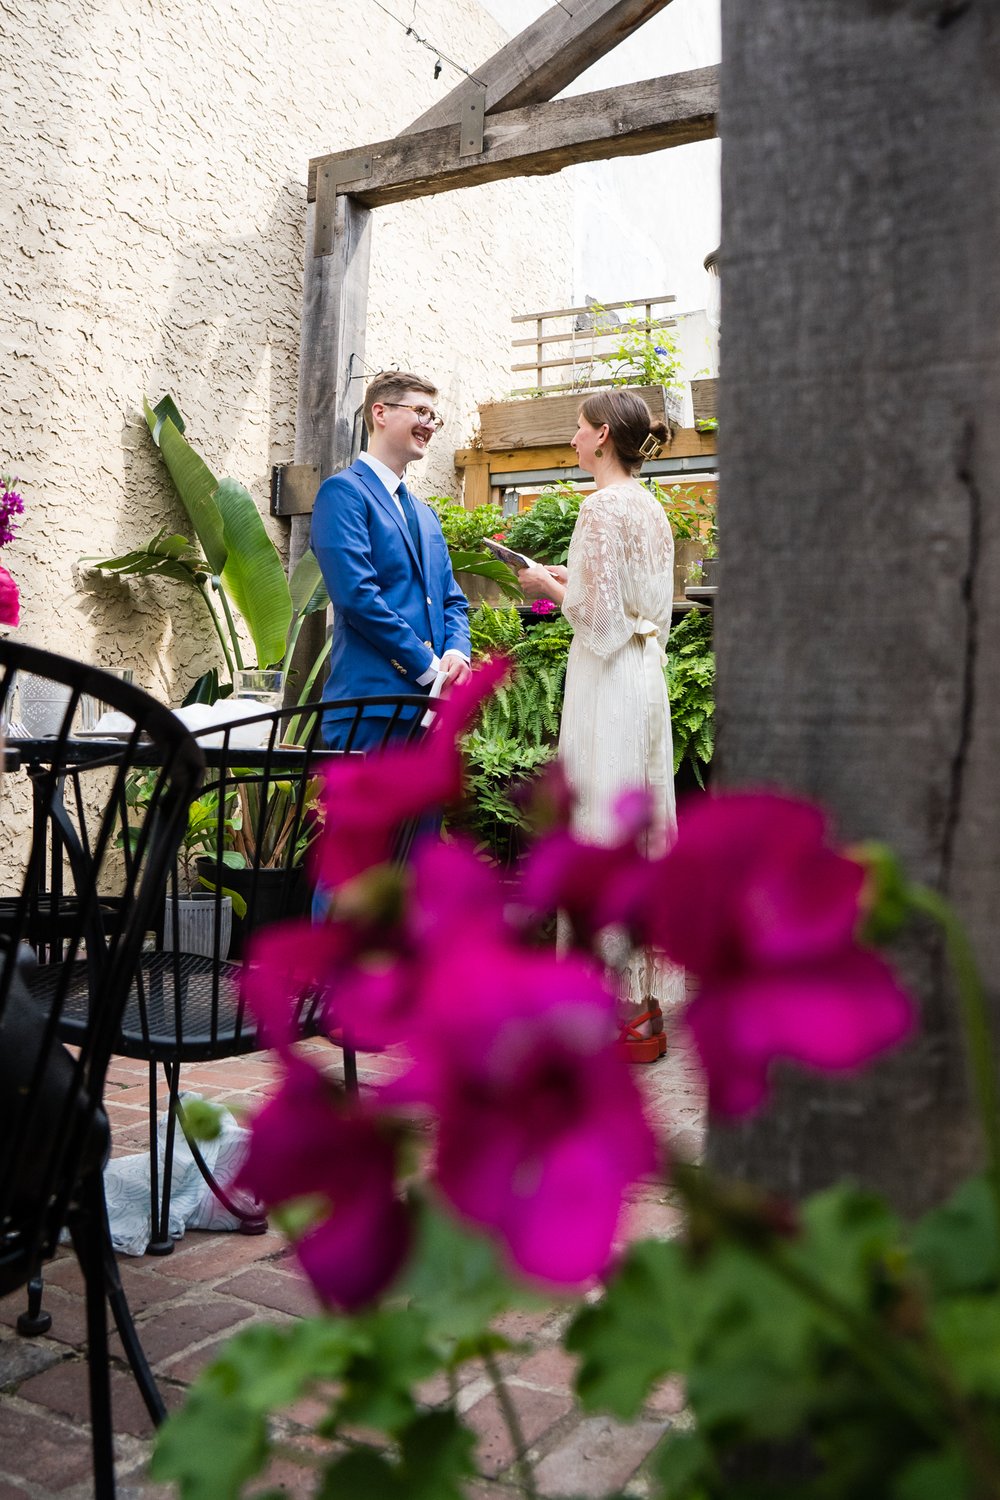 Bride and groom exchanging vows seen through bright flowers, Philadelphia wedding photography